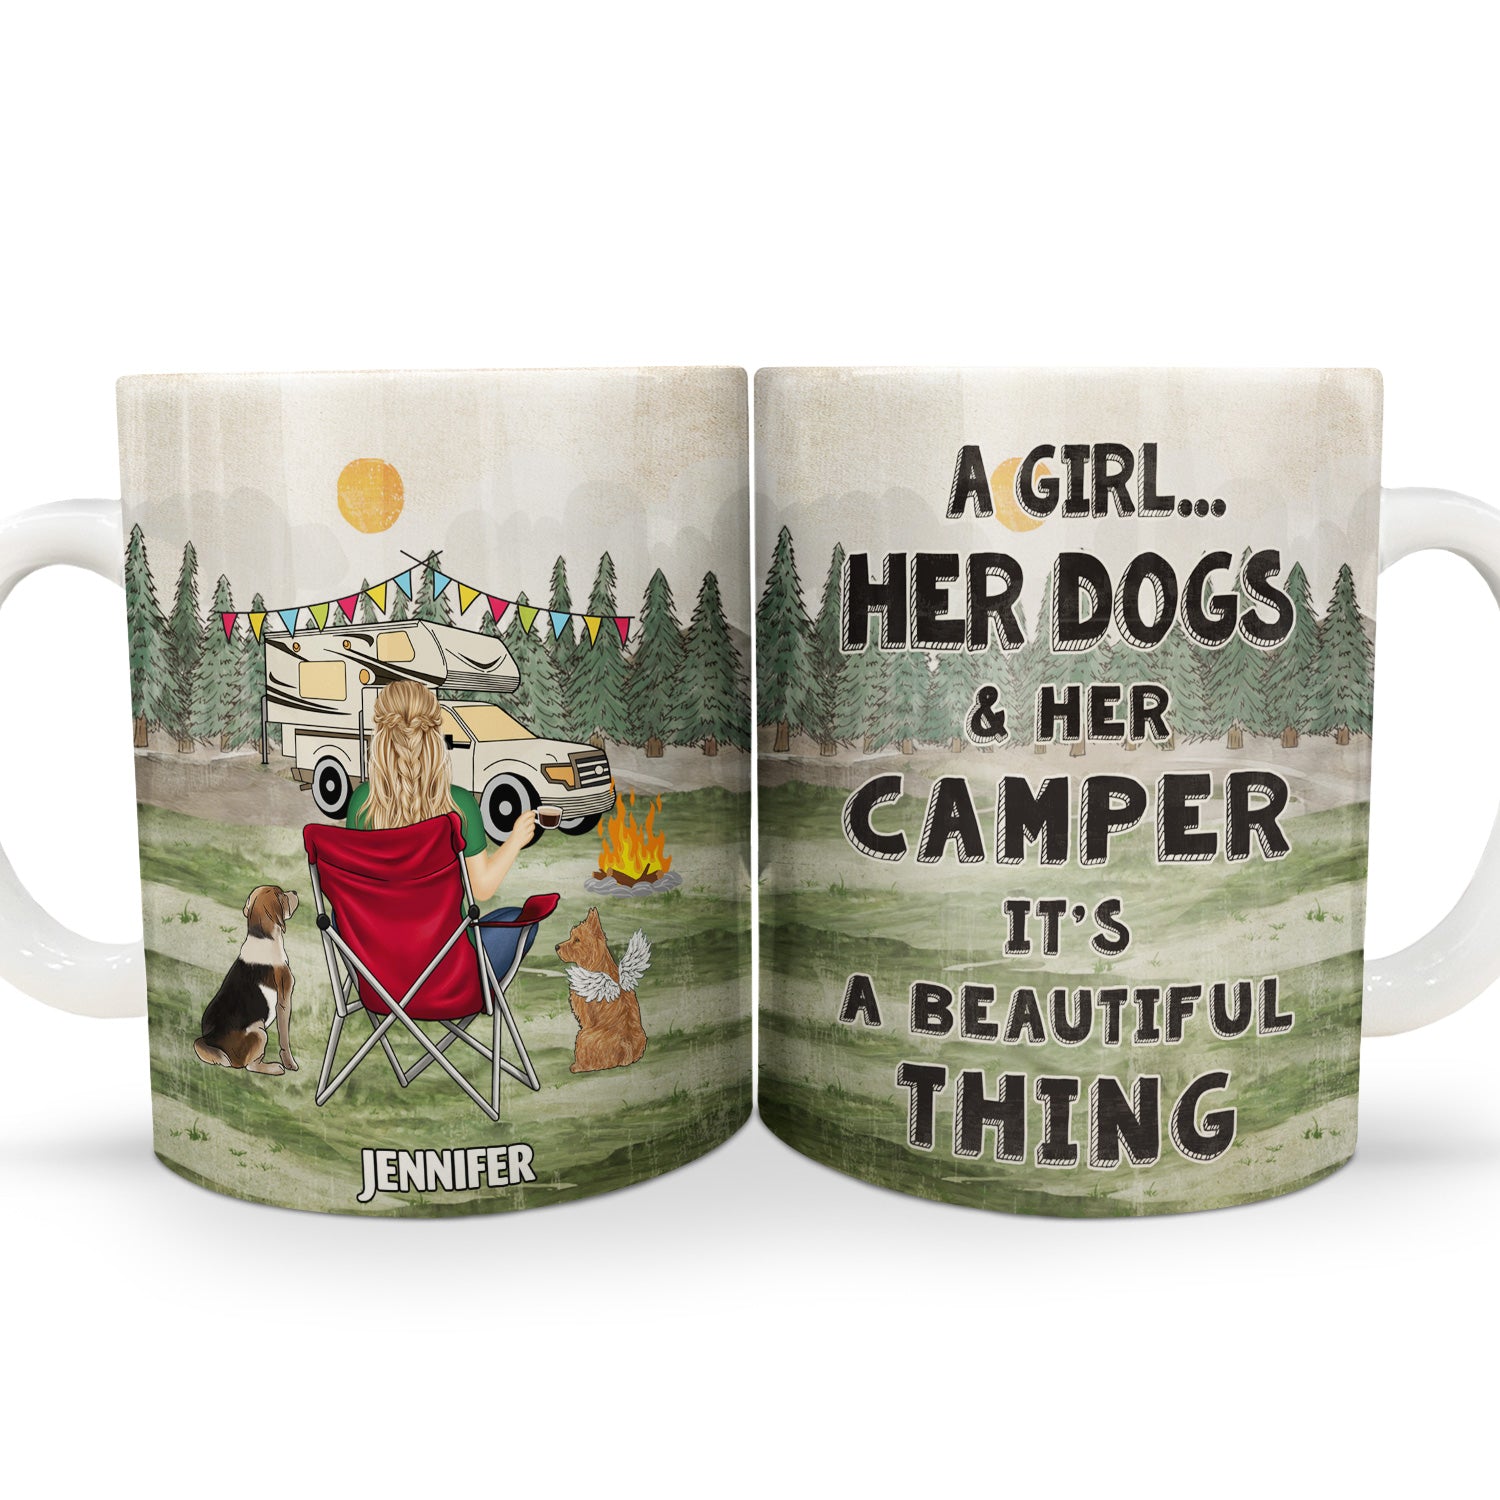 It's A Beautiful Things - Gift For Dog And Camping Lovers - Personalized White Edge-to-Edge Mug